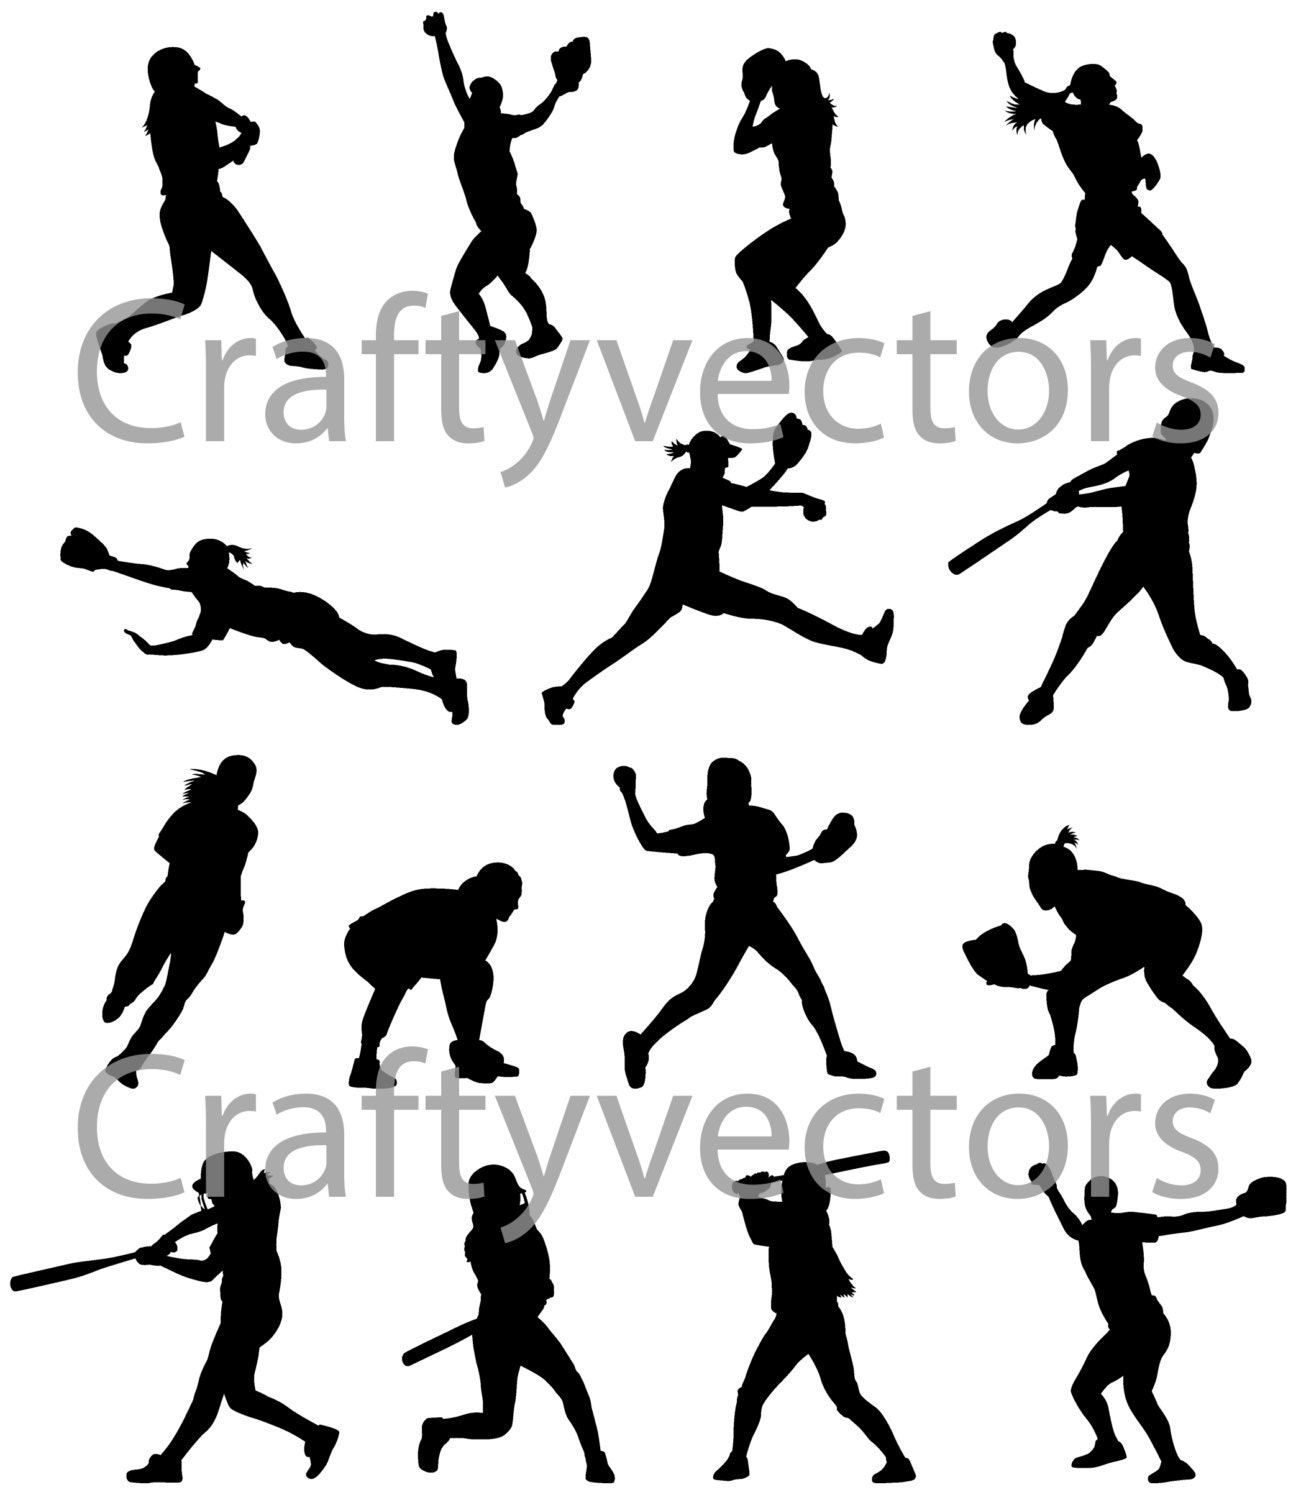 Softball Silhouettes vector SVG cut file by CraftyVectors on Etsy